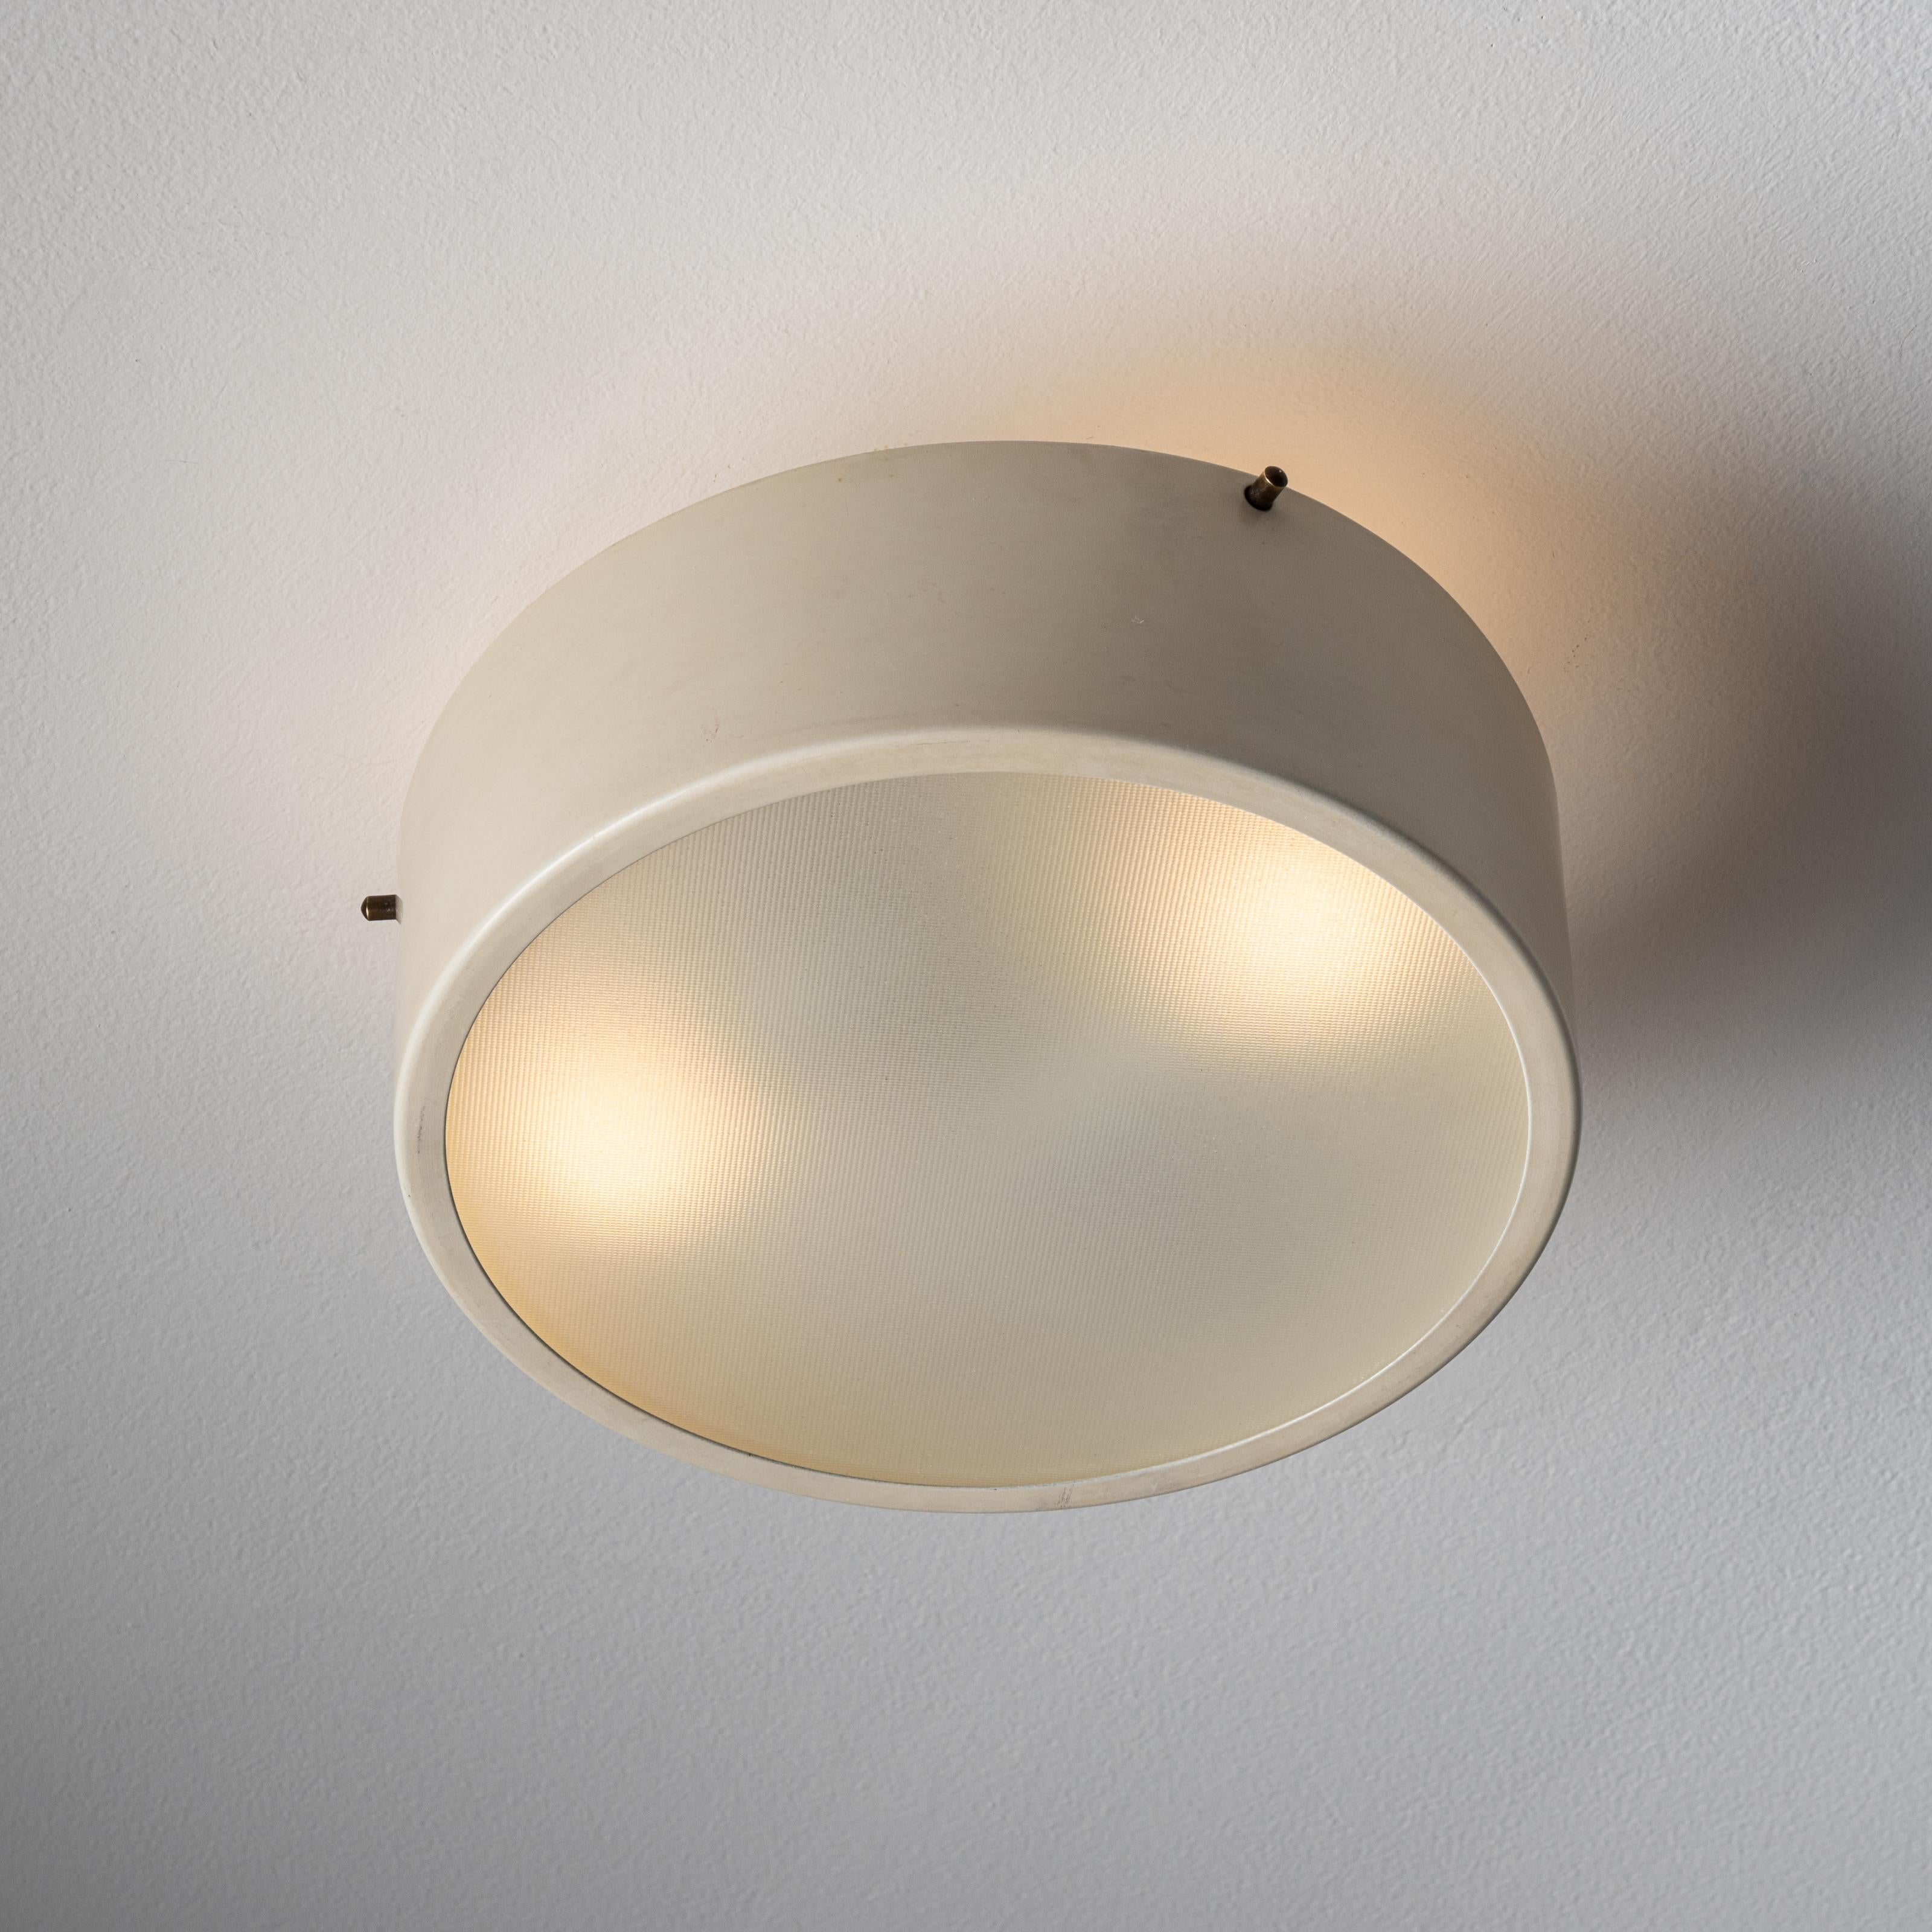 Flush mount ceiling light by Tito Agnoli. Designed and manufactured in Italy, circa 1960's. Metal, glass. Wired for U.S, standards. We recommend:Lamping: 120v 2 Qty EU E14 Socket 40w Incandescent Frosted Globe.